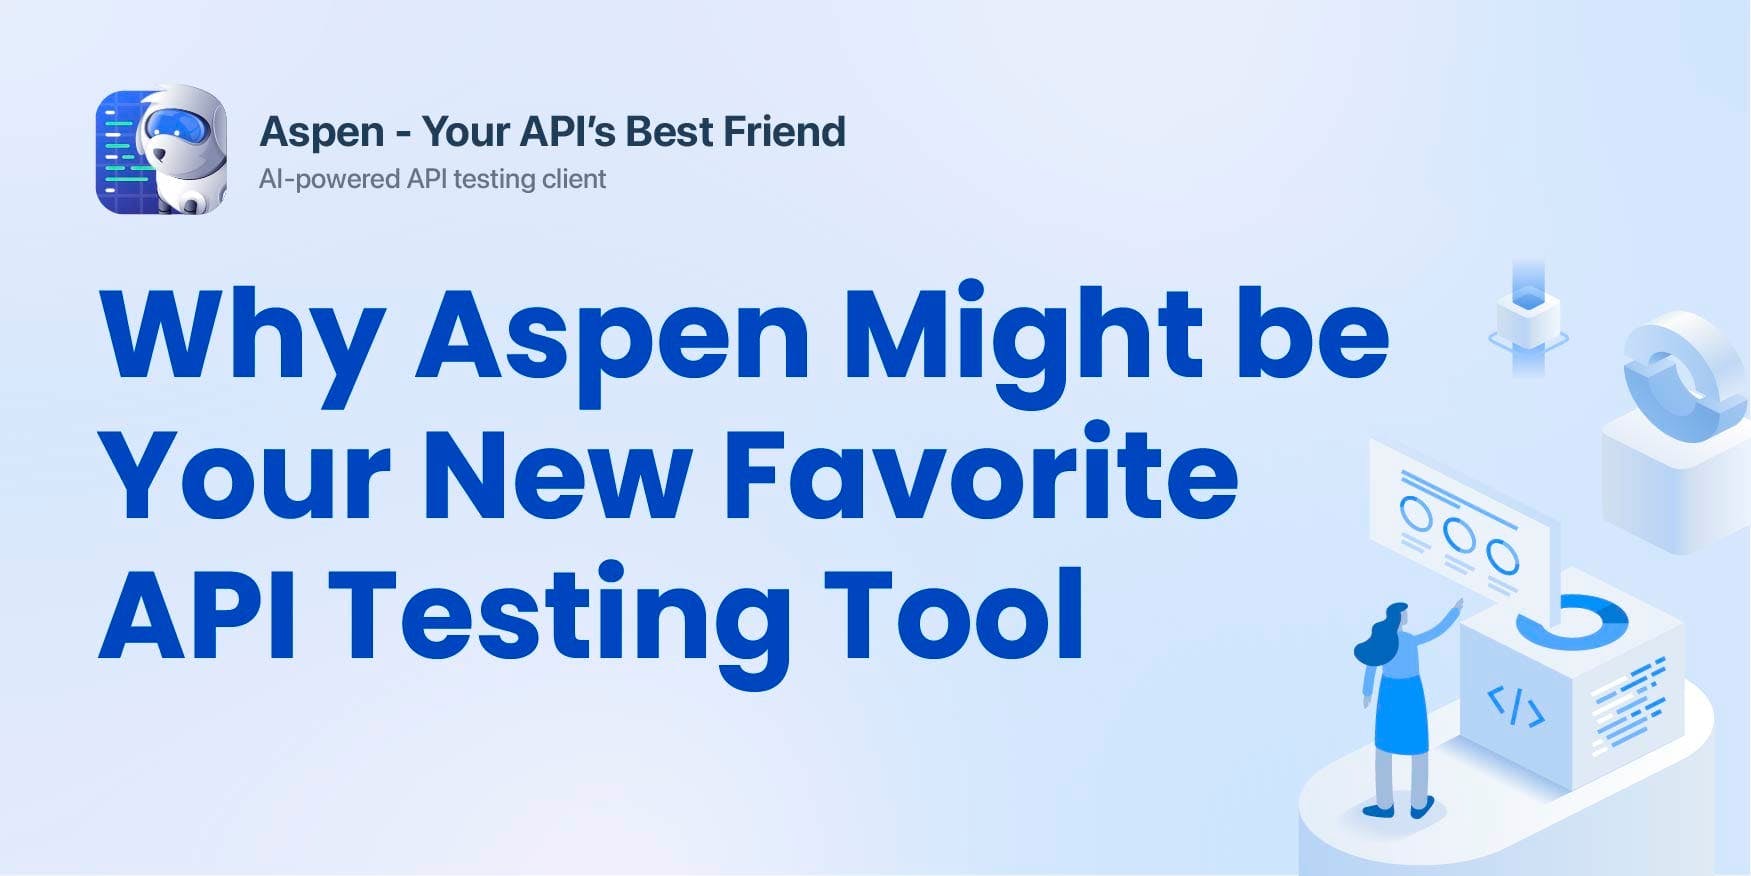 Why Aspen Might Be Your New Favorite API Testing Tool